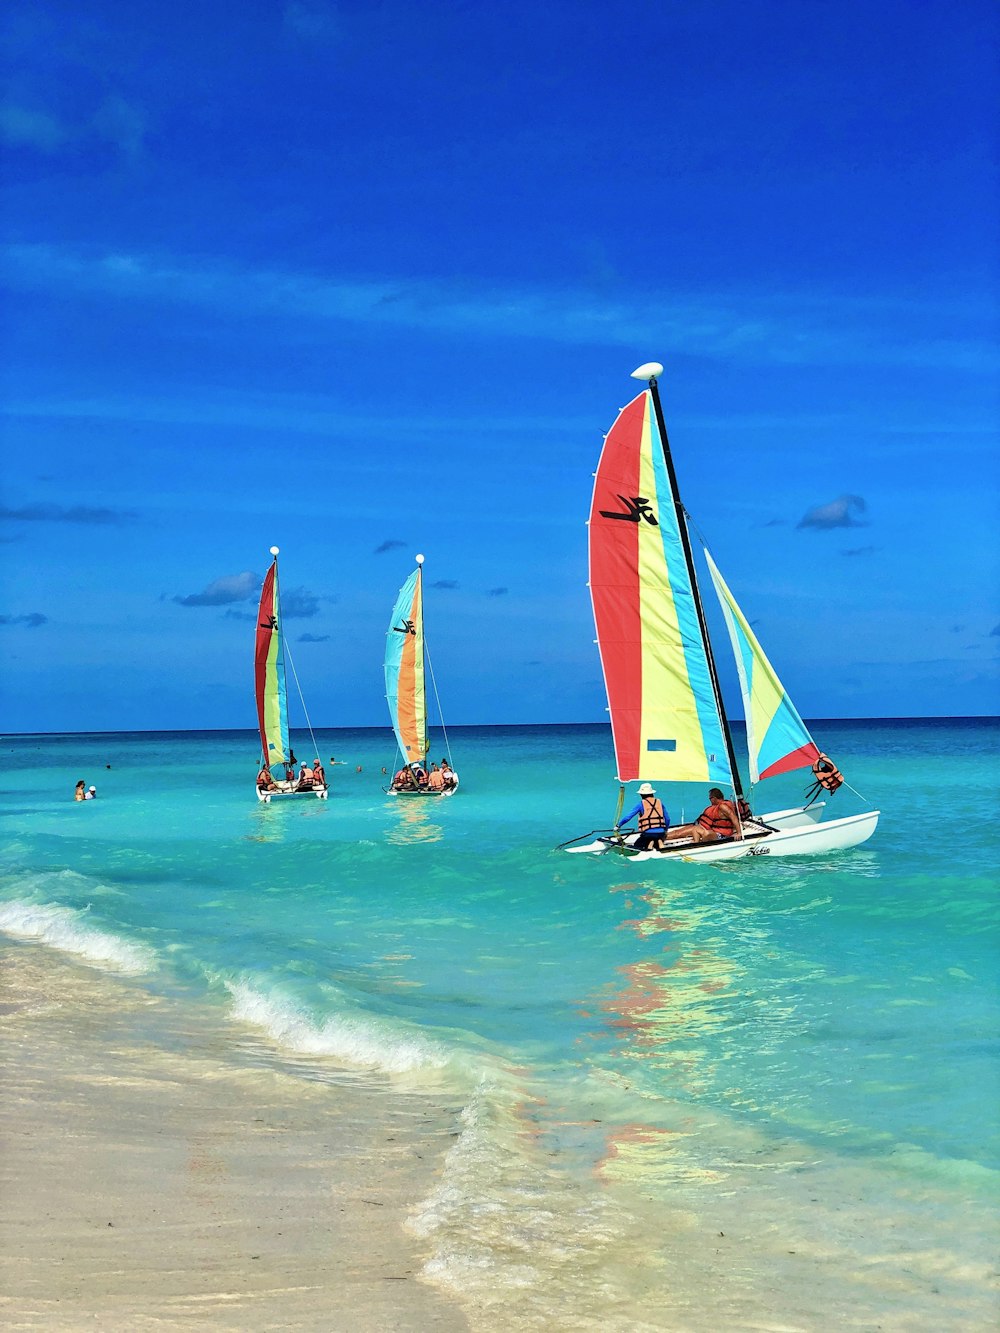 people riding on sail boat on sea during daytime